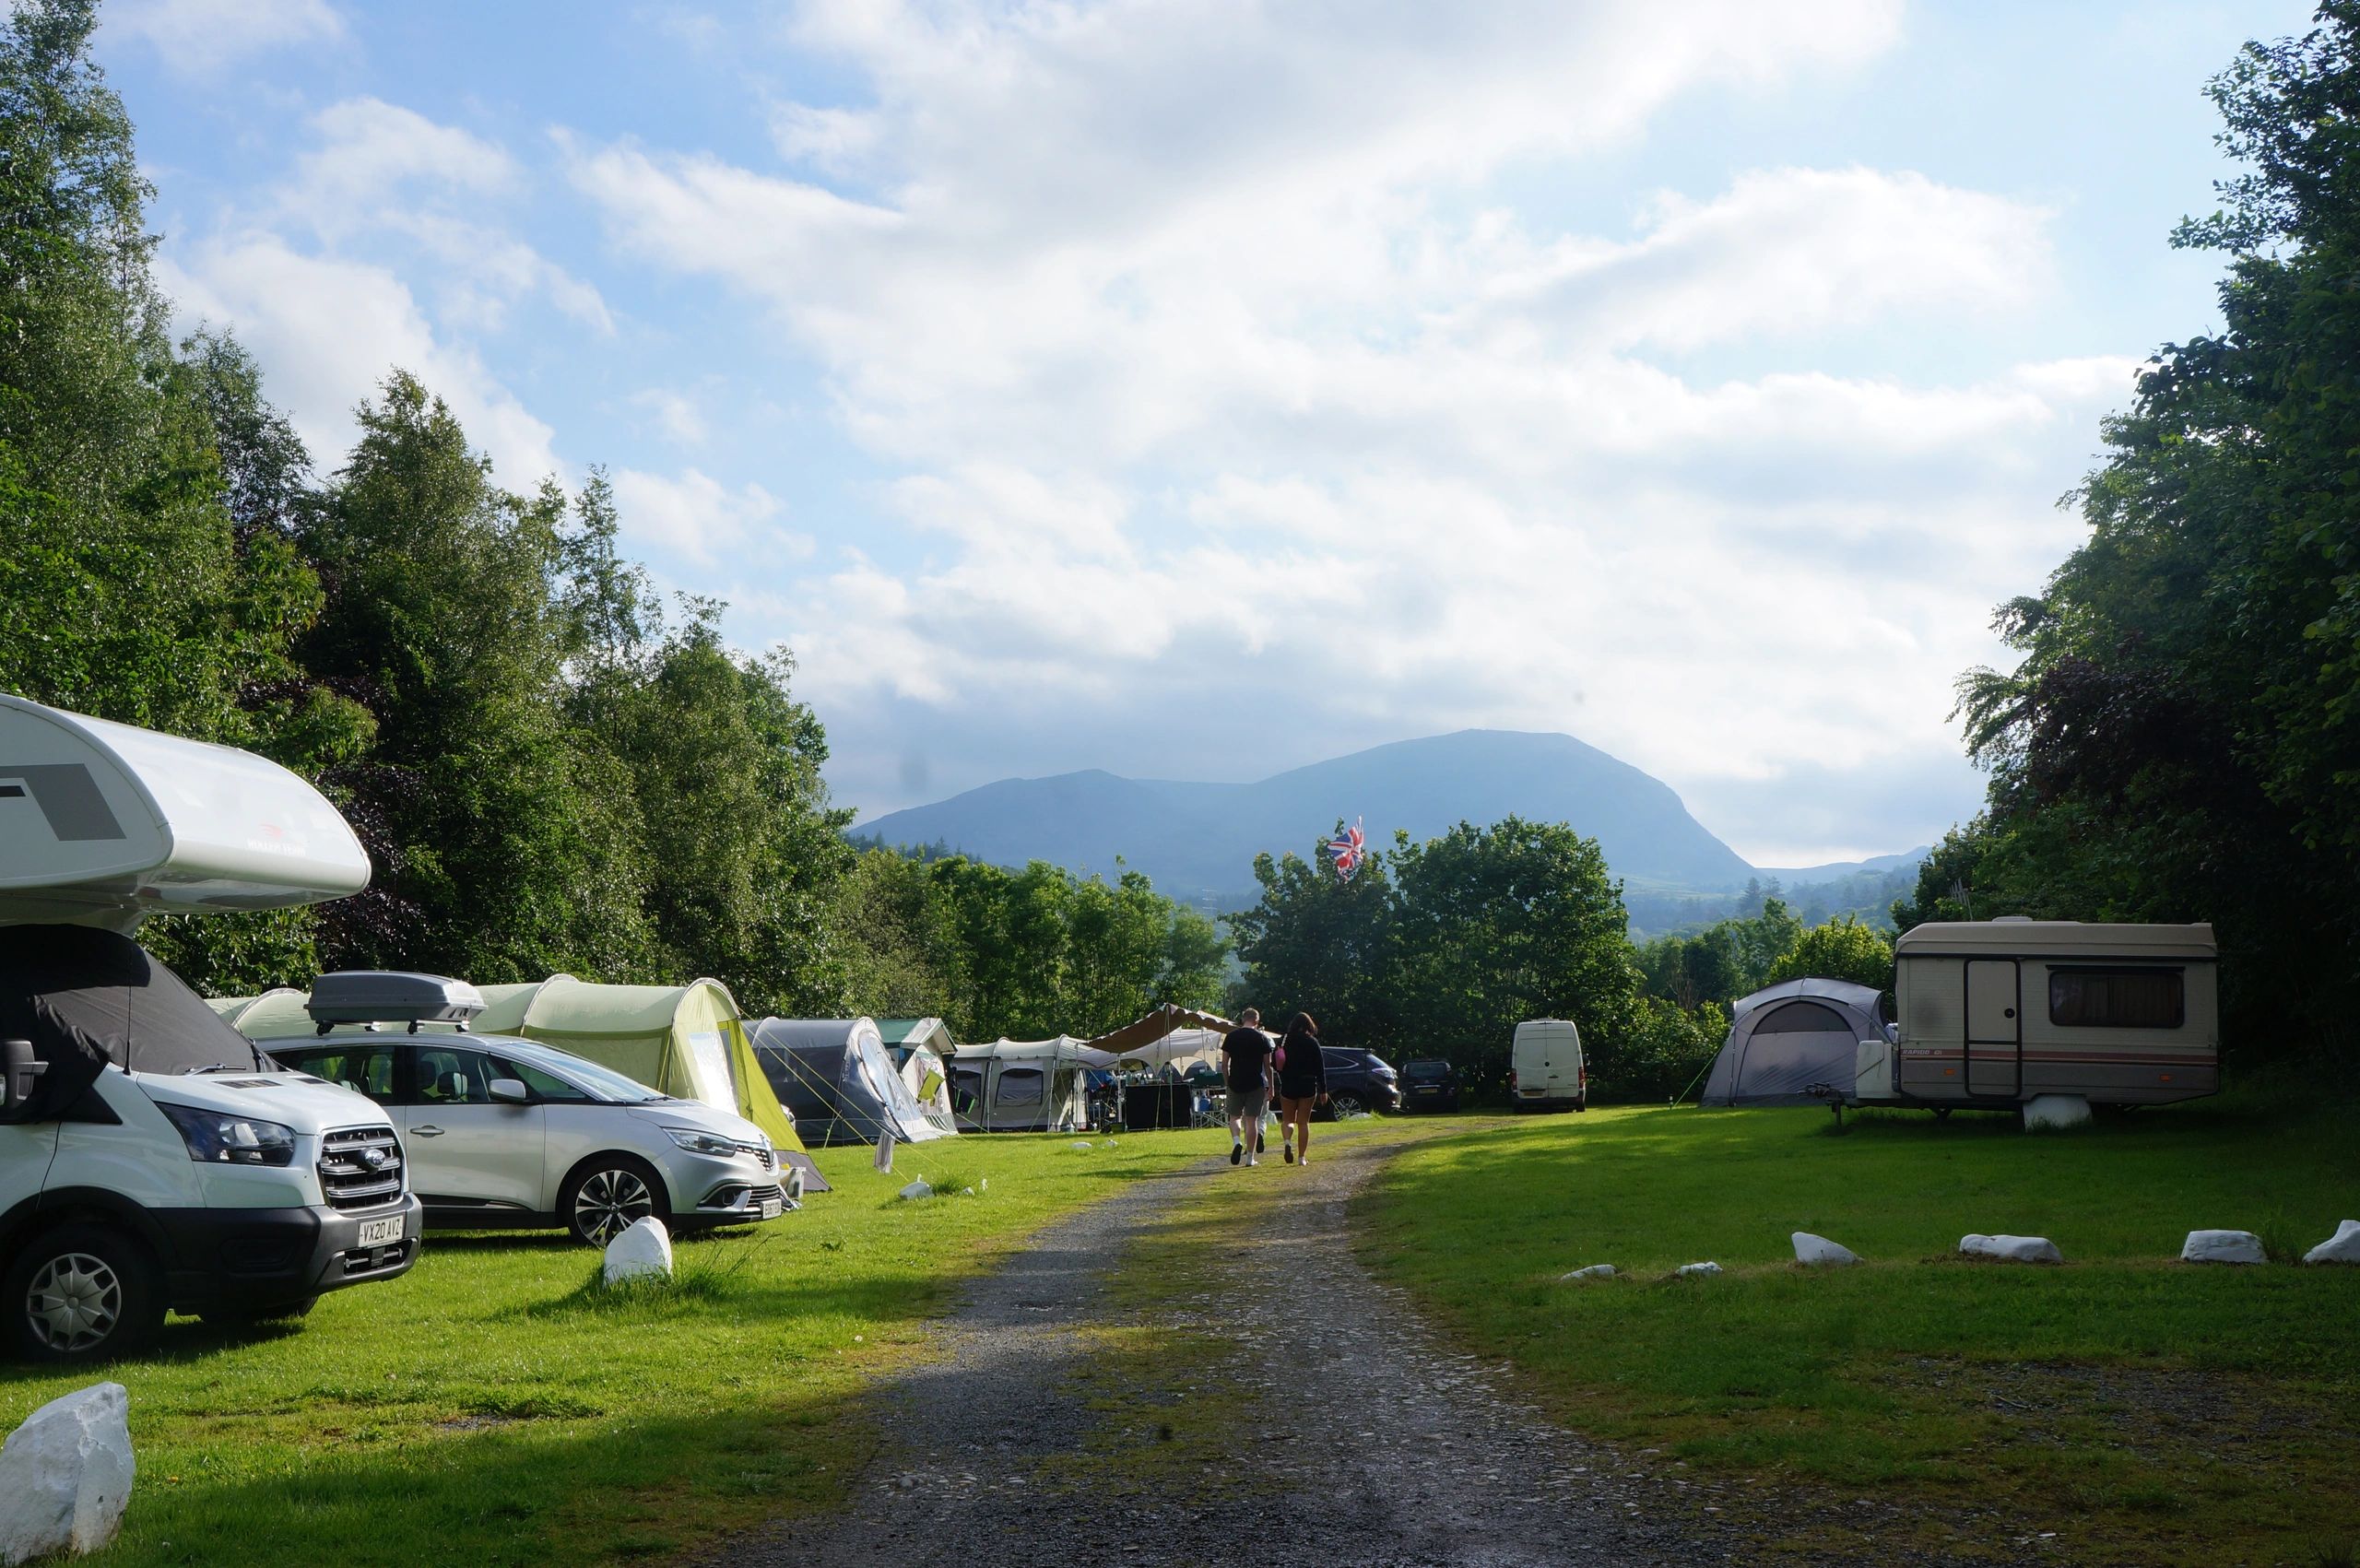 Tents, caravans and motorhomes on upper field with manod mountsins in background